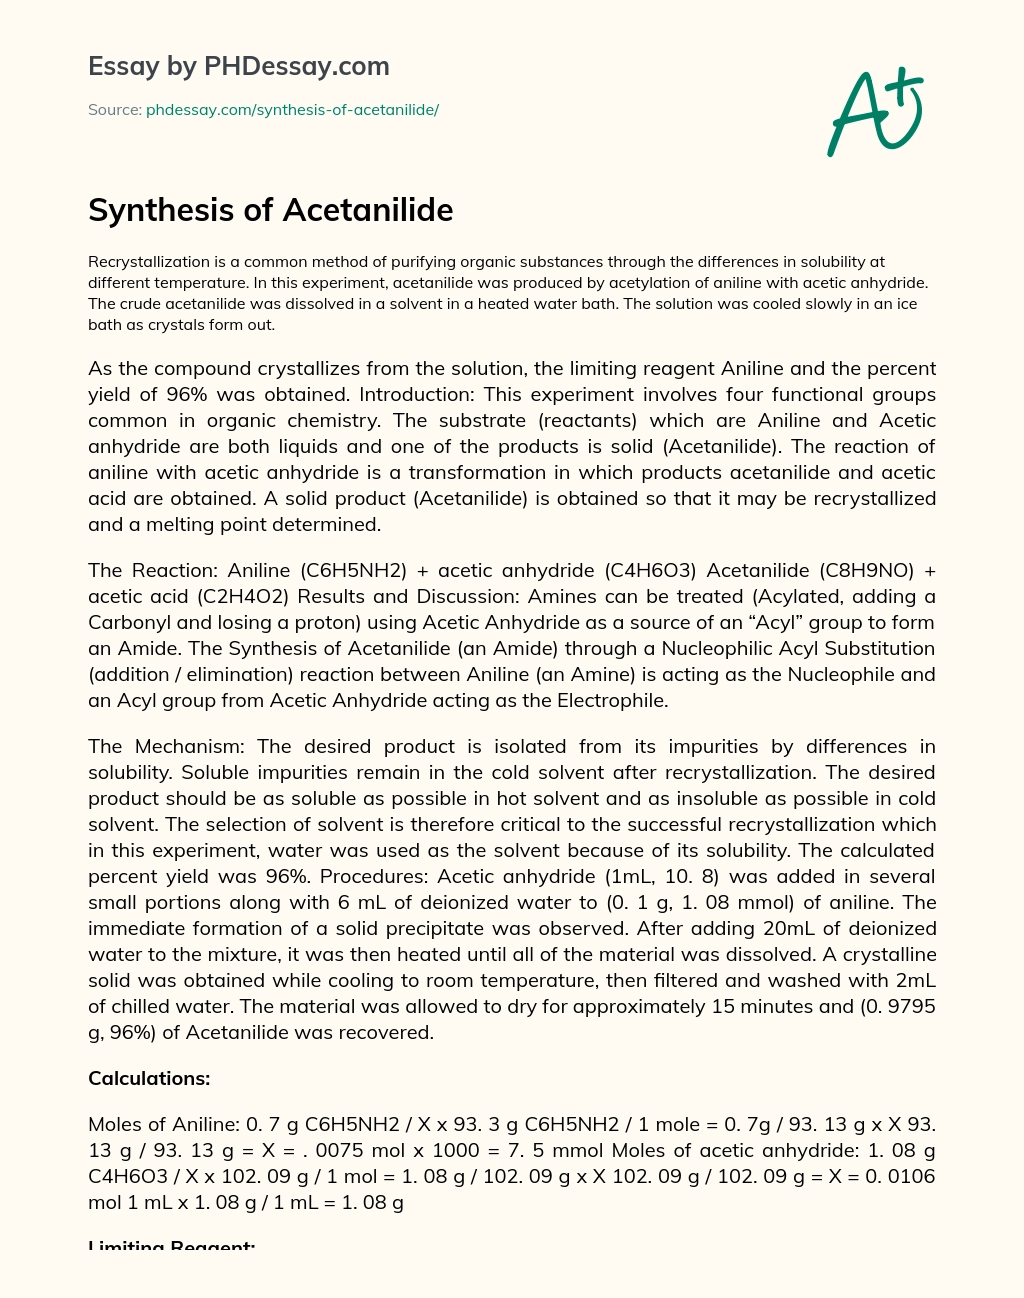 Synthesis of Acetanilide essay